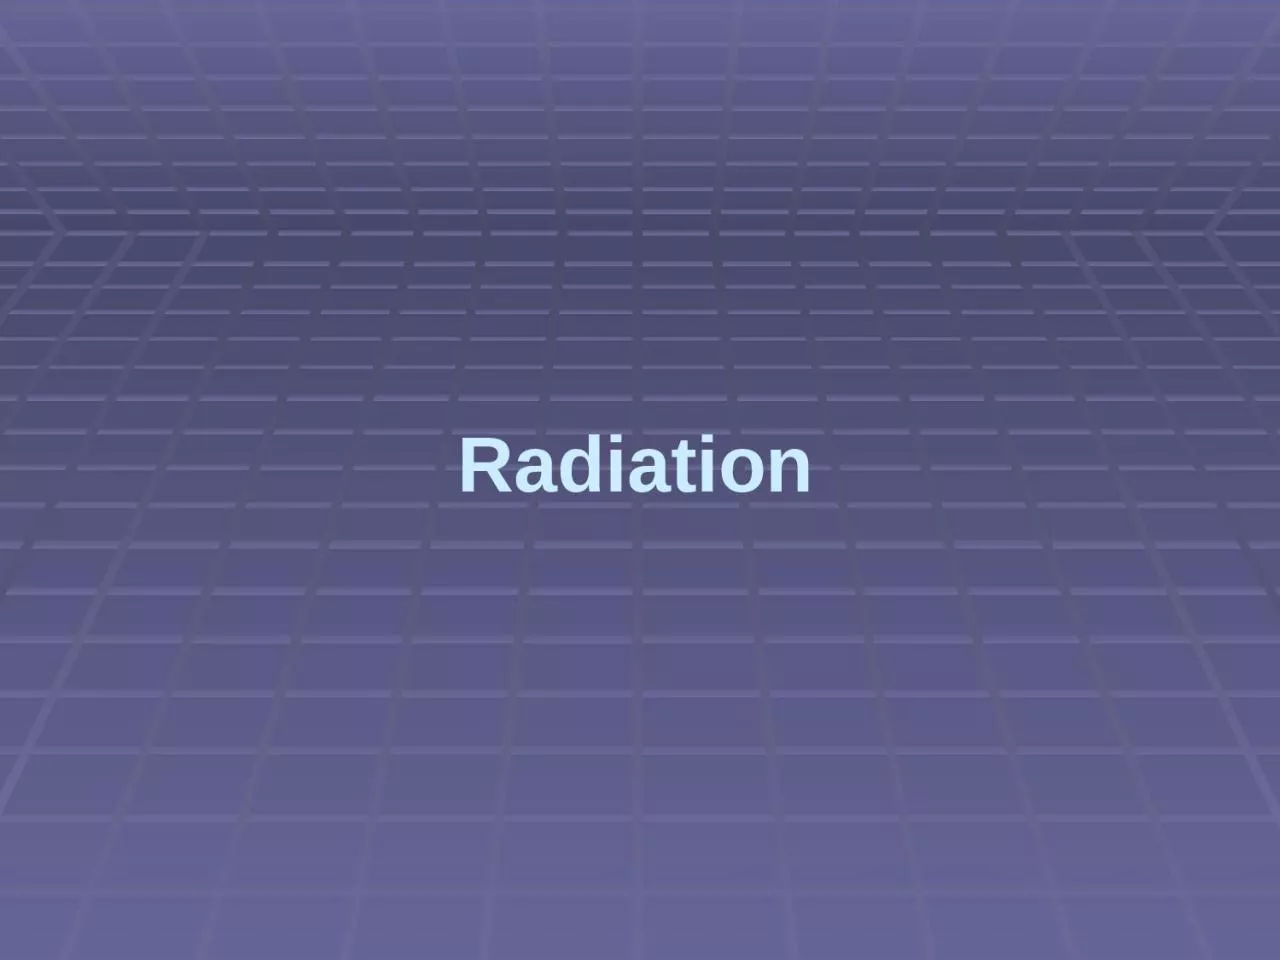 Radiation What is radiation?